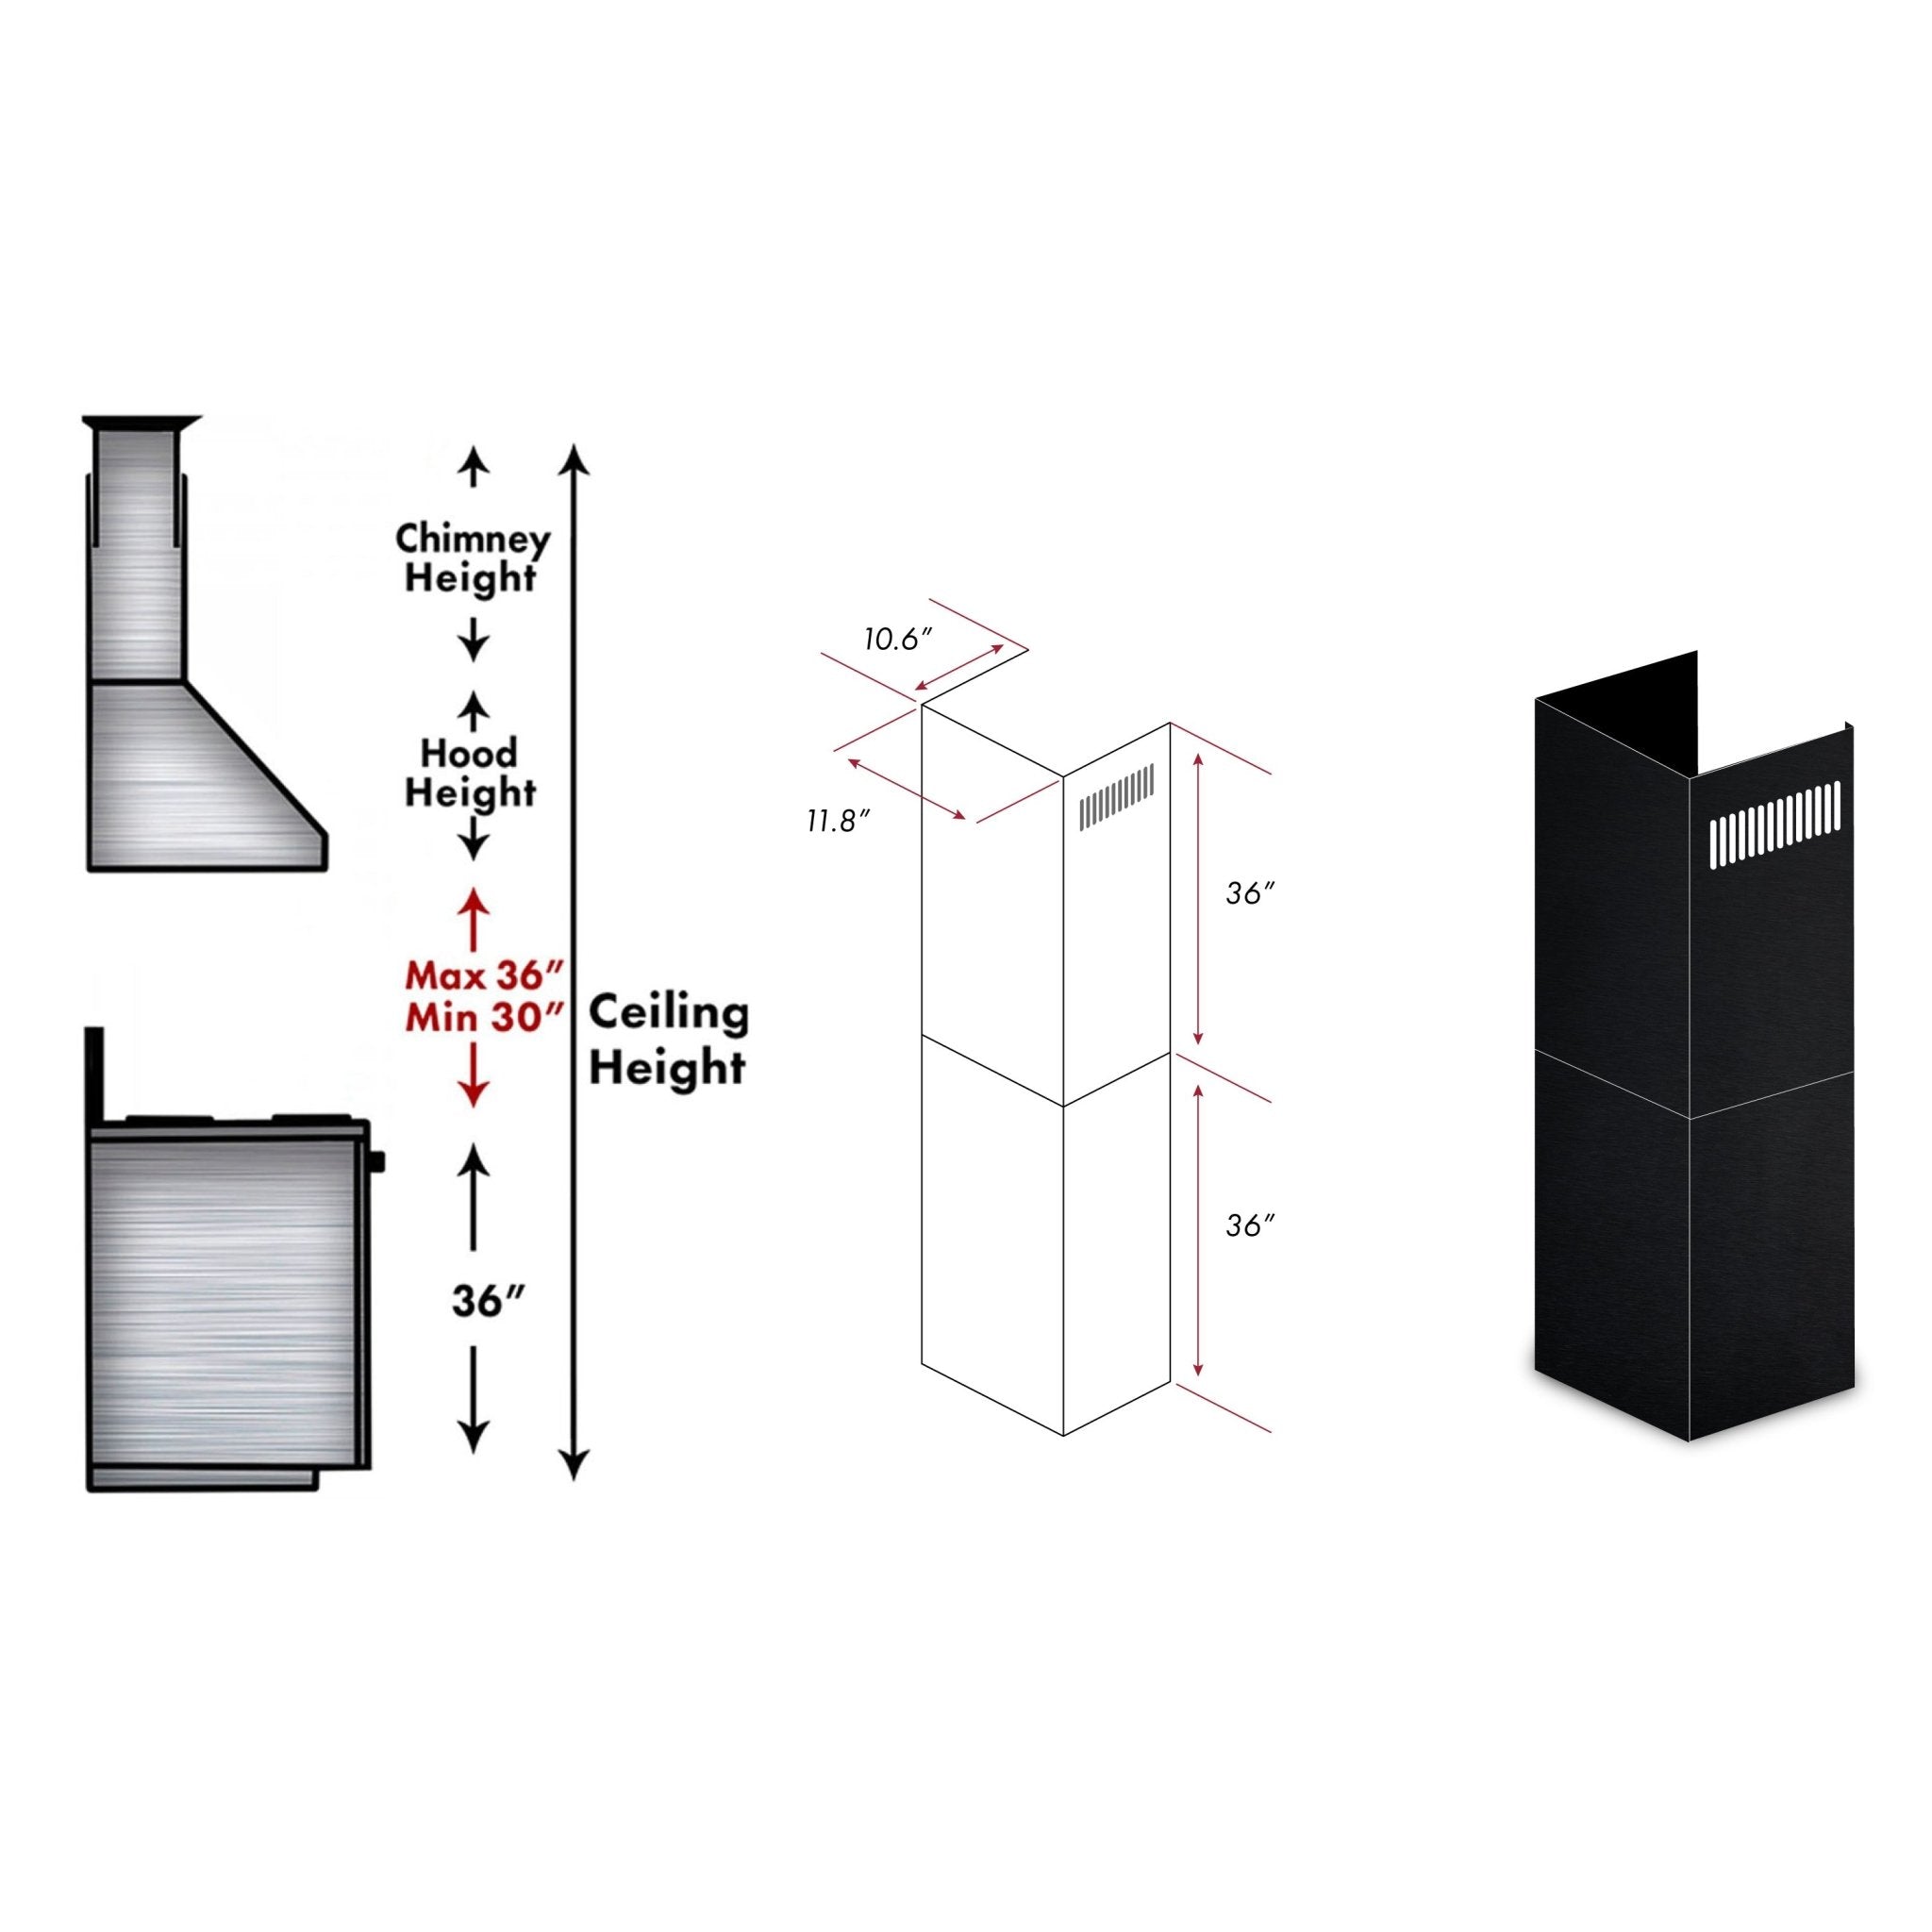 ZLINE Kitchen and Bath, ZLINE 2-36" Chimney Extensions for 10 ft. to 12 ft. Ceilings (2PCEXT-BSKEN), 2PCEXT-BSKEN,